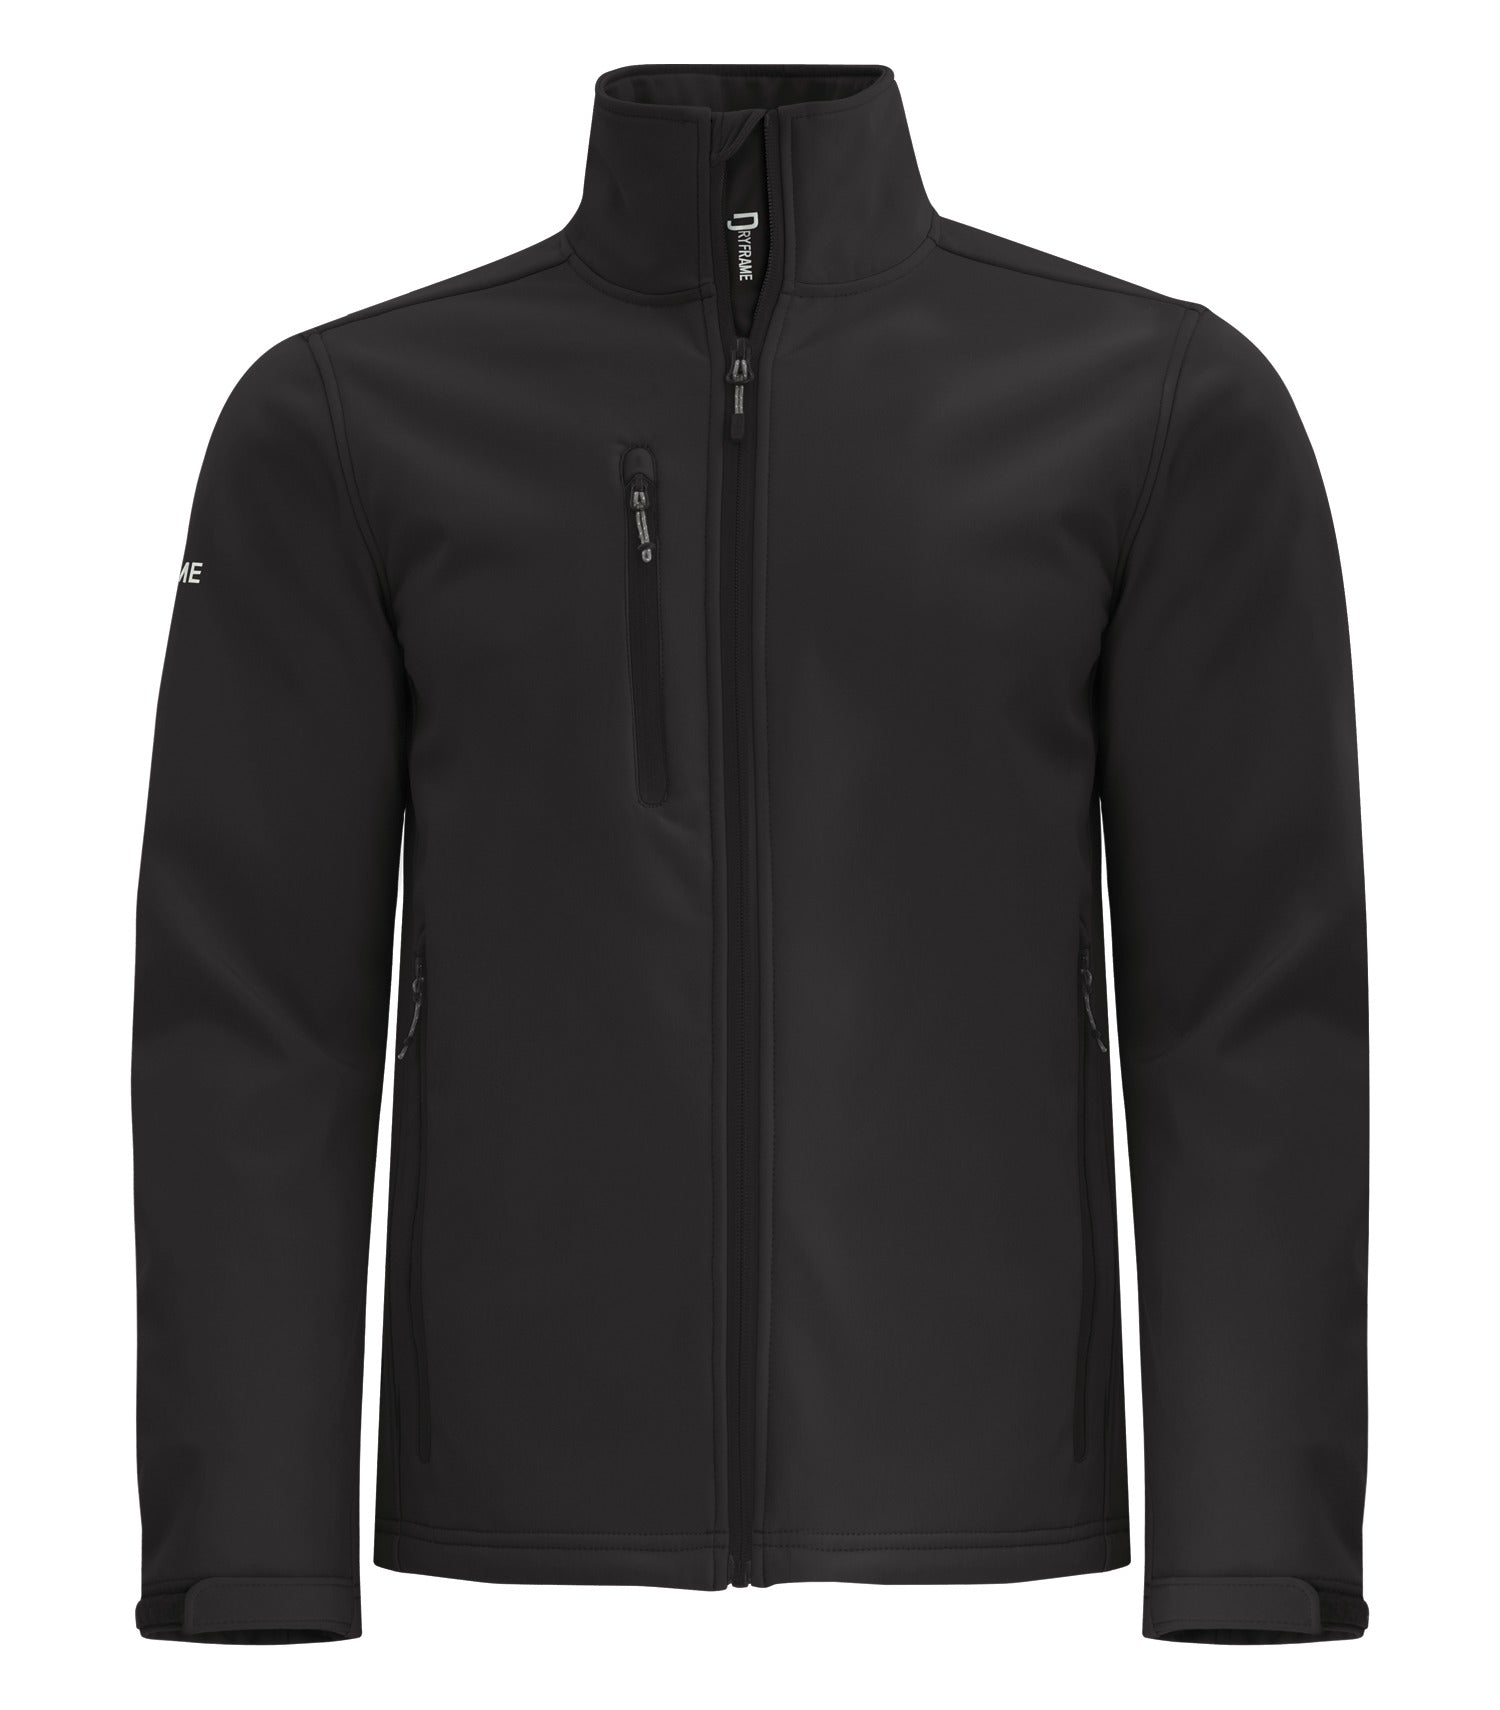 DRYFRAME® STRATA TECH WATER REPELLENT SOFT SHELL JACKET. DF7662